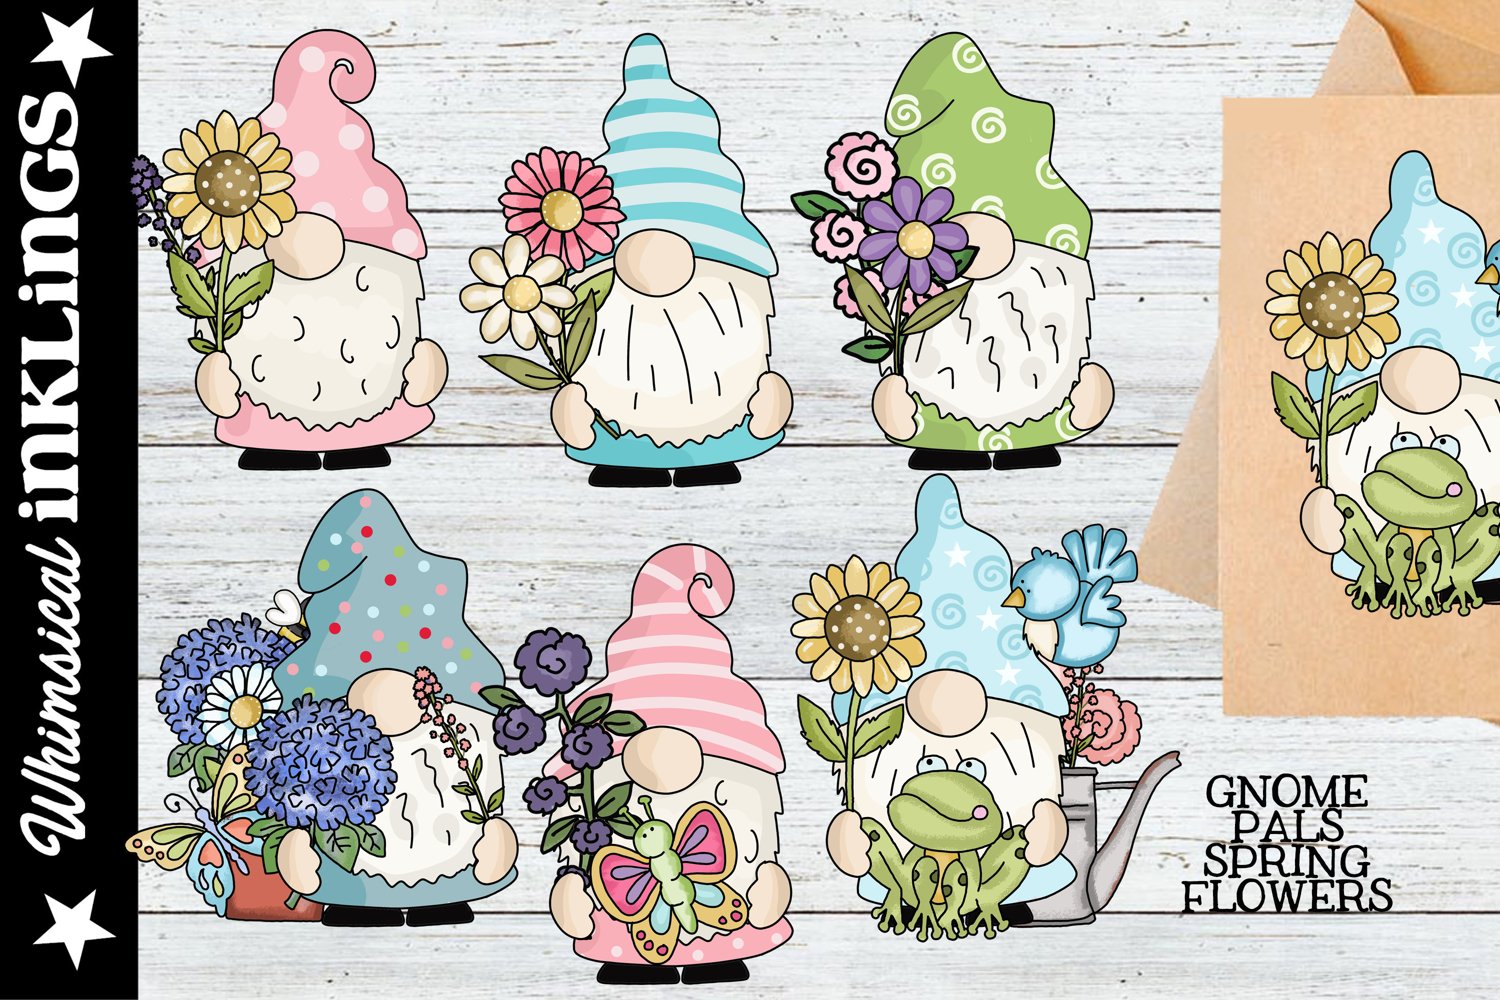 Gnome pals with spring flowers.